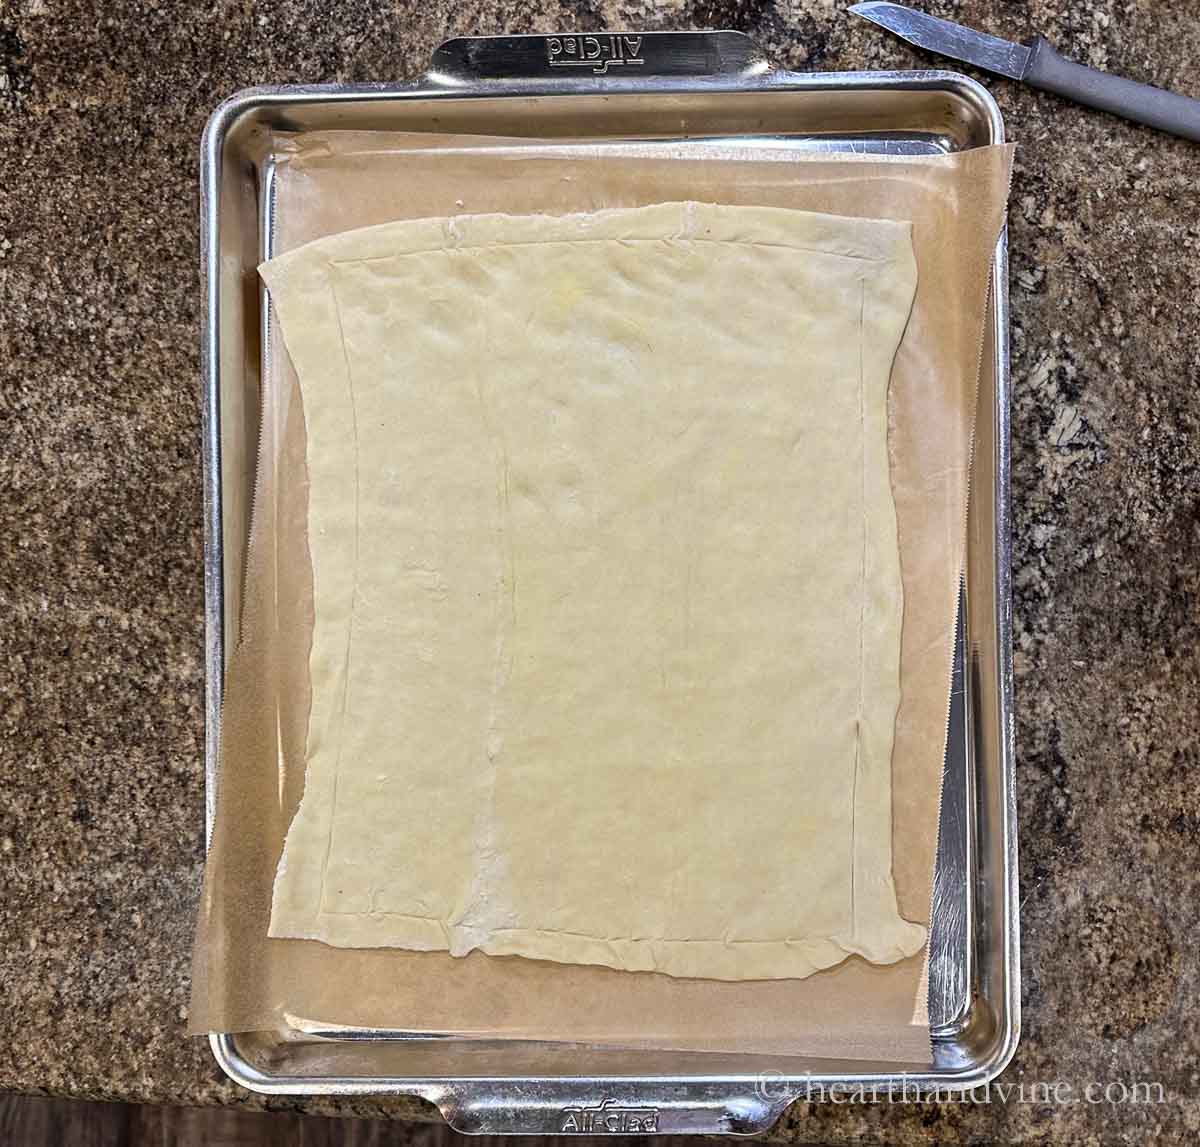 Puff pastry on parchment paper with edges scored.